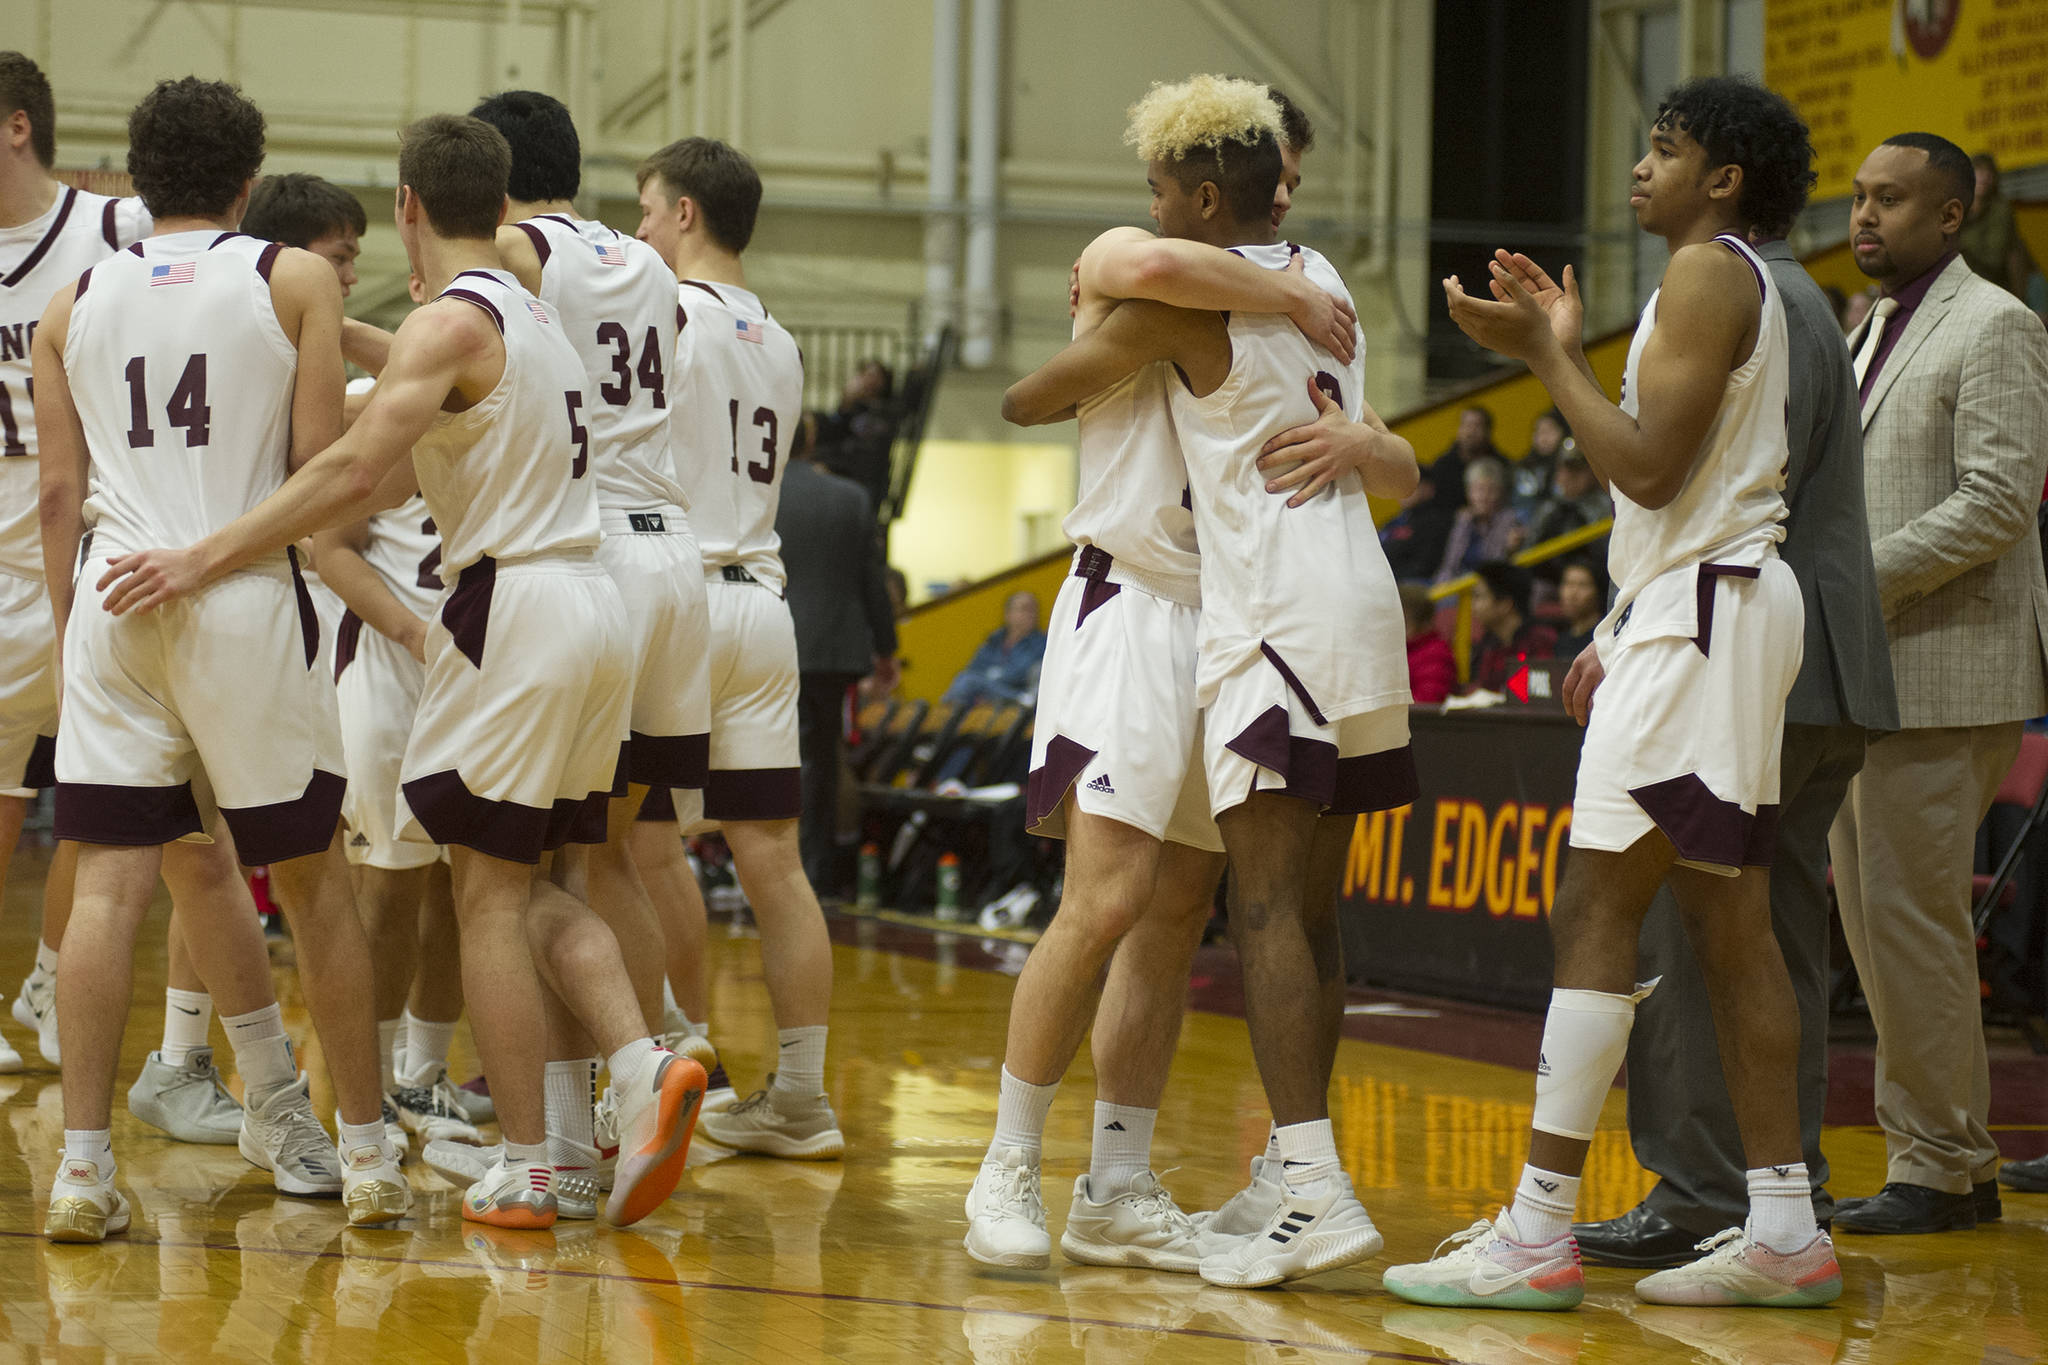 The Ketchikan boys basketball team celebrates its 65-60 victory over Juneau-Douglas in the Region V 4A championship game at the B.J. McGillis Gymnasium at Mt. Edgecumbe High School on Friday, March 8, 2019. (Nolin Ainsworth | Juneau Empire)